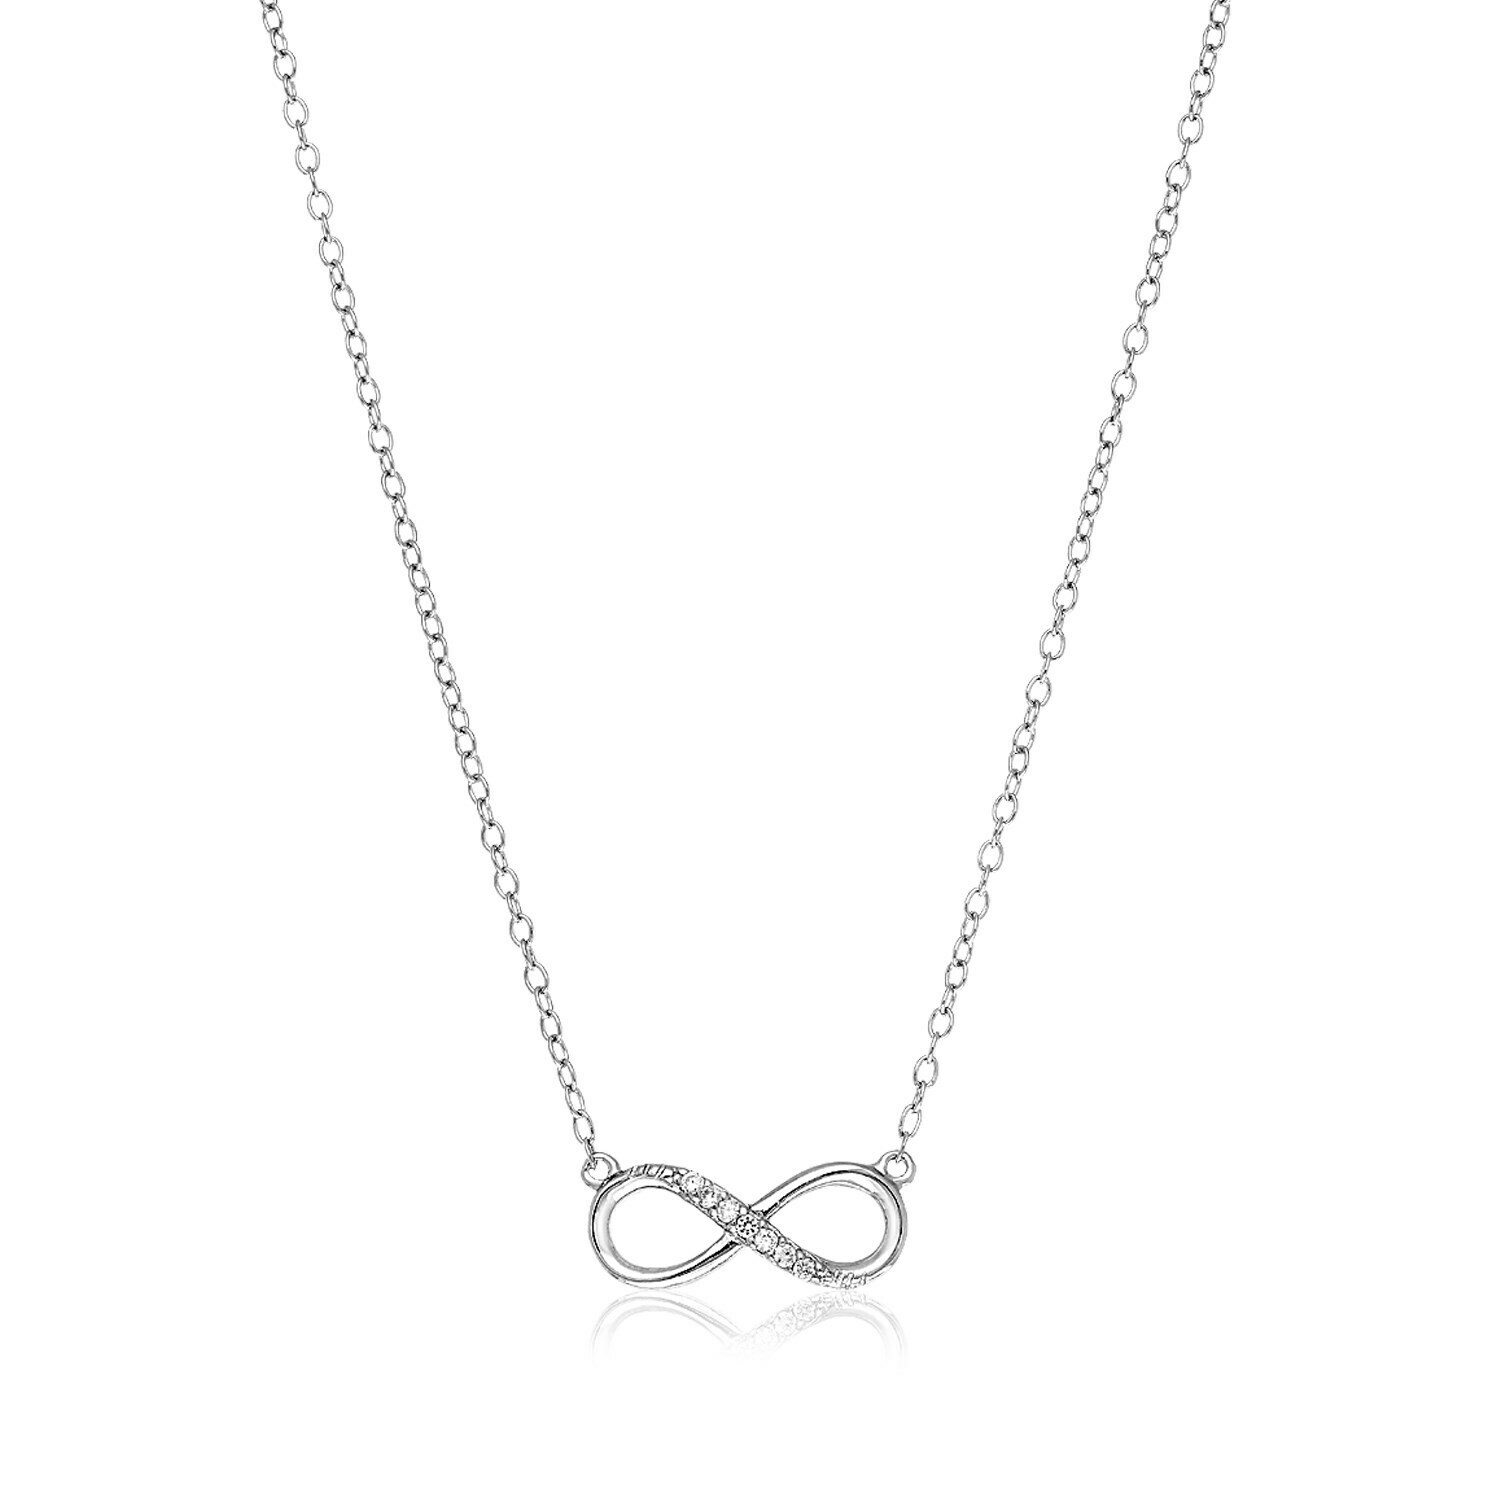 Sterling Silver Petite Infinity Symbol Necklace with Cubic Zirconias, Size: 18&quot;